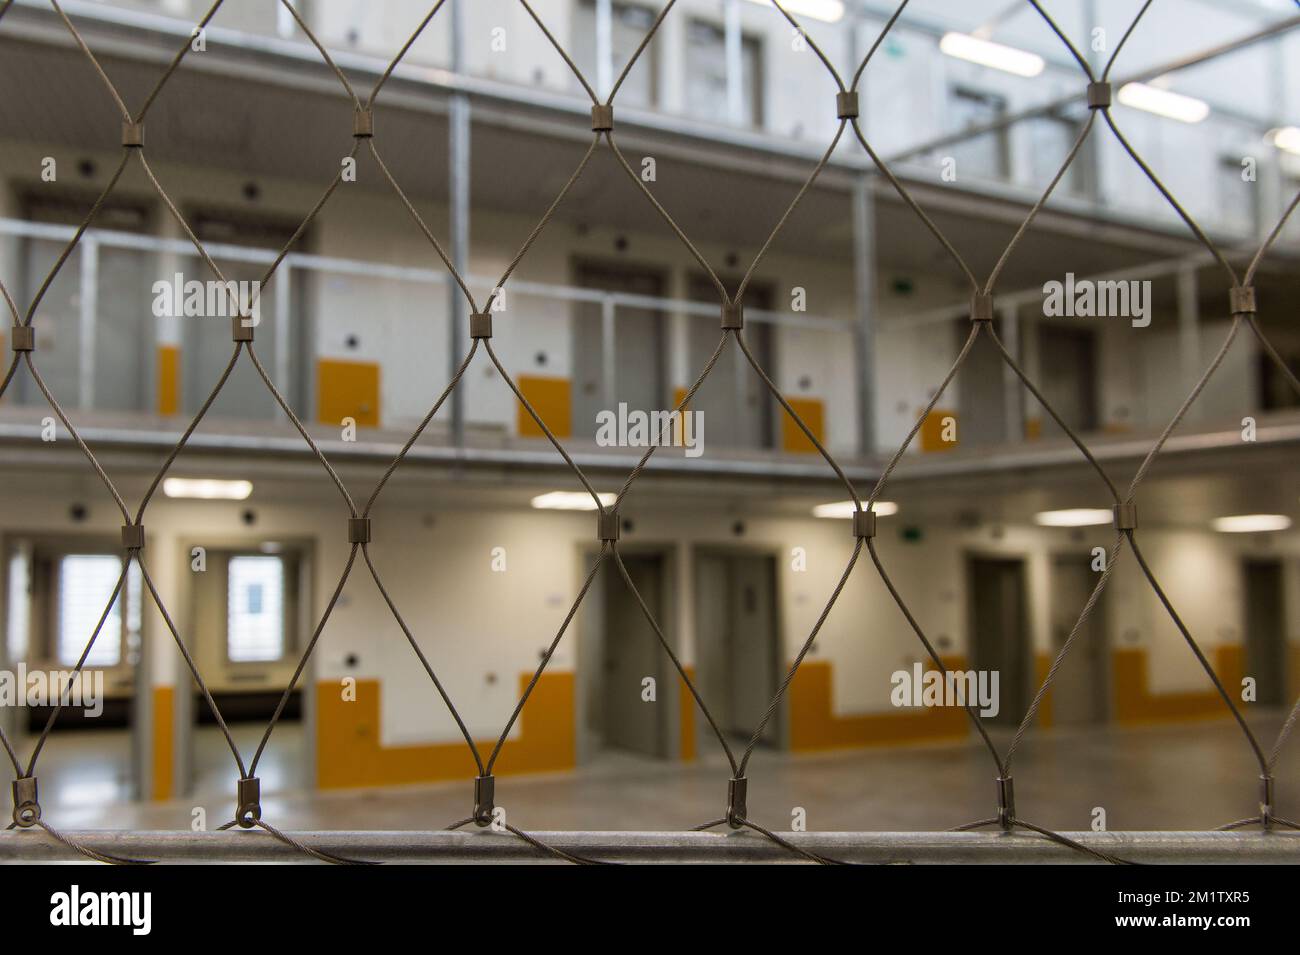 20140214 - BEVEREN-WAAS, BELGIUM: Illustration picture taken during the official opening of the new jail in Melsele, Beveren, which is one of the four new prisons planned in Belgium to enlarge the number of cells. BELGA PHOTO JONAS ROOSENS Stock Photo